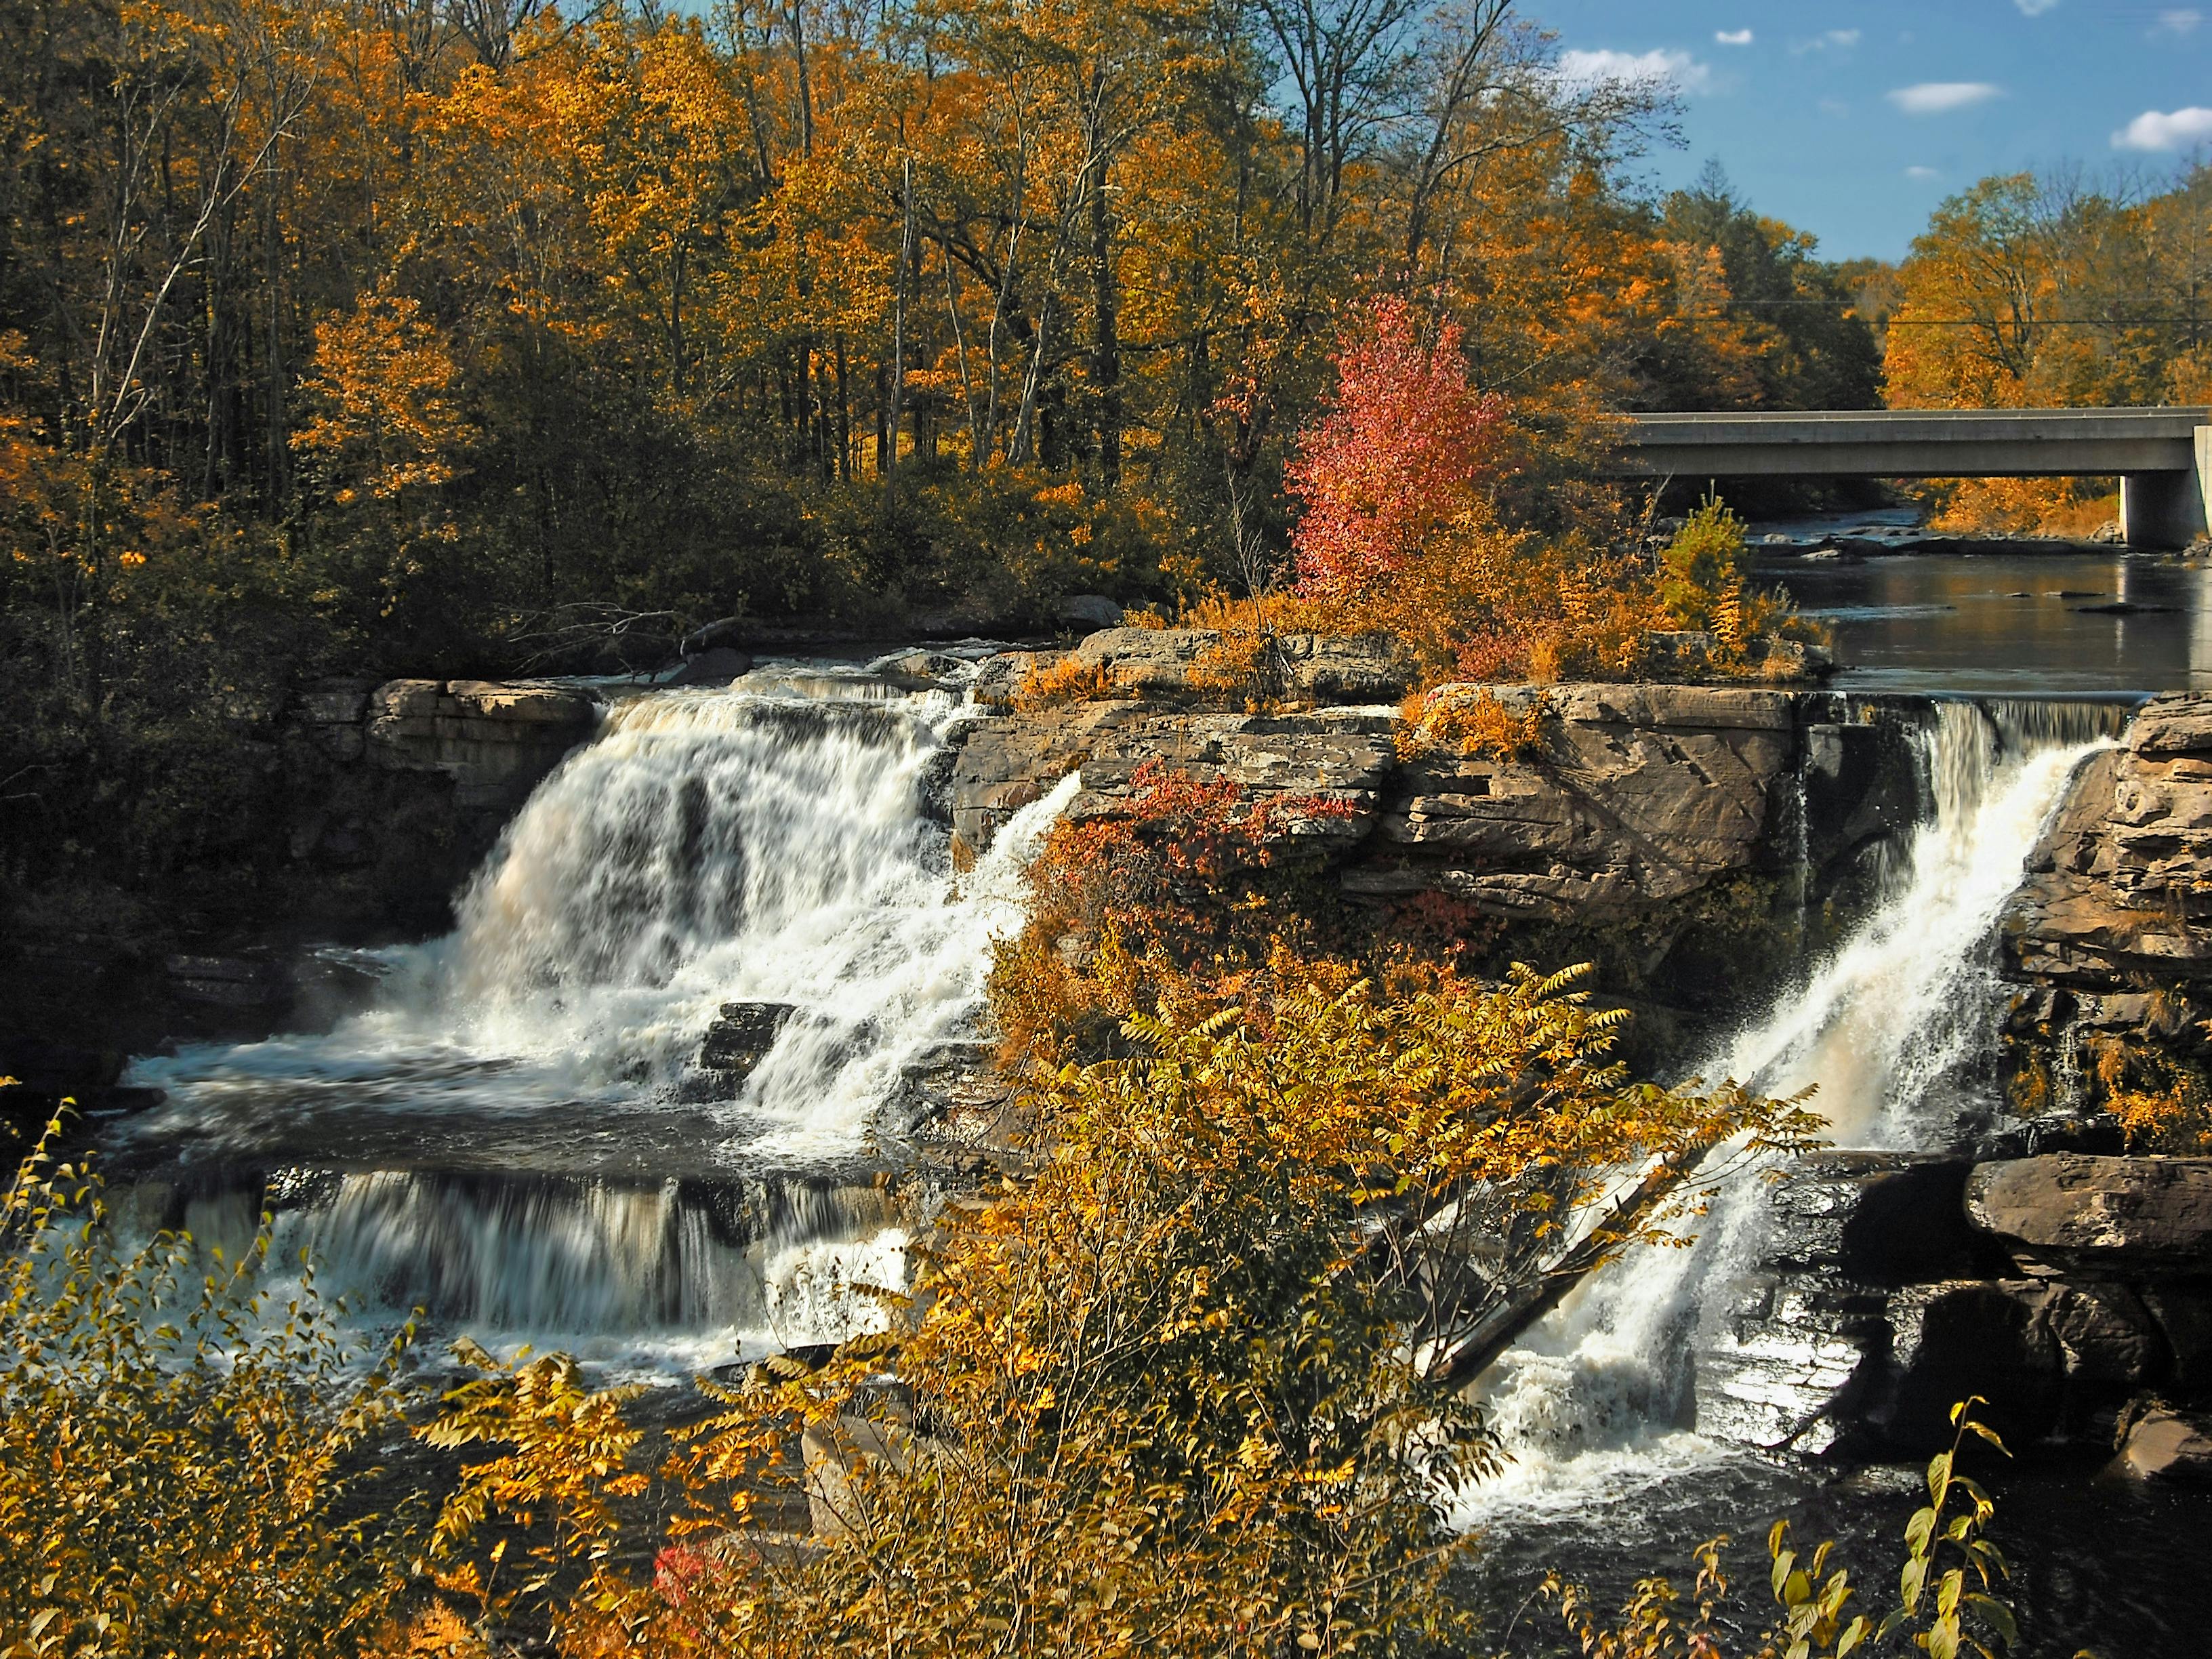 A waterfall on Big Bushkill Creek. There are several trees around with yellow and orange leaves.